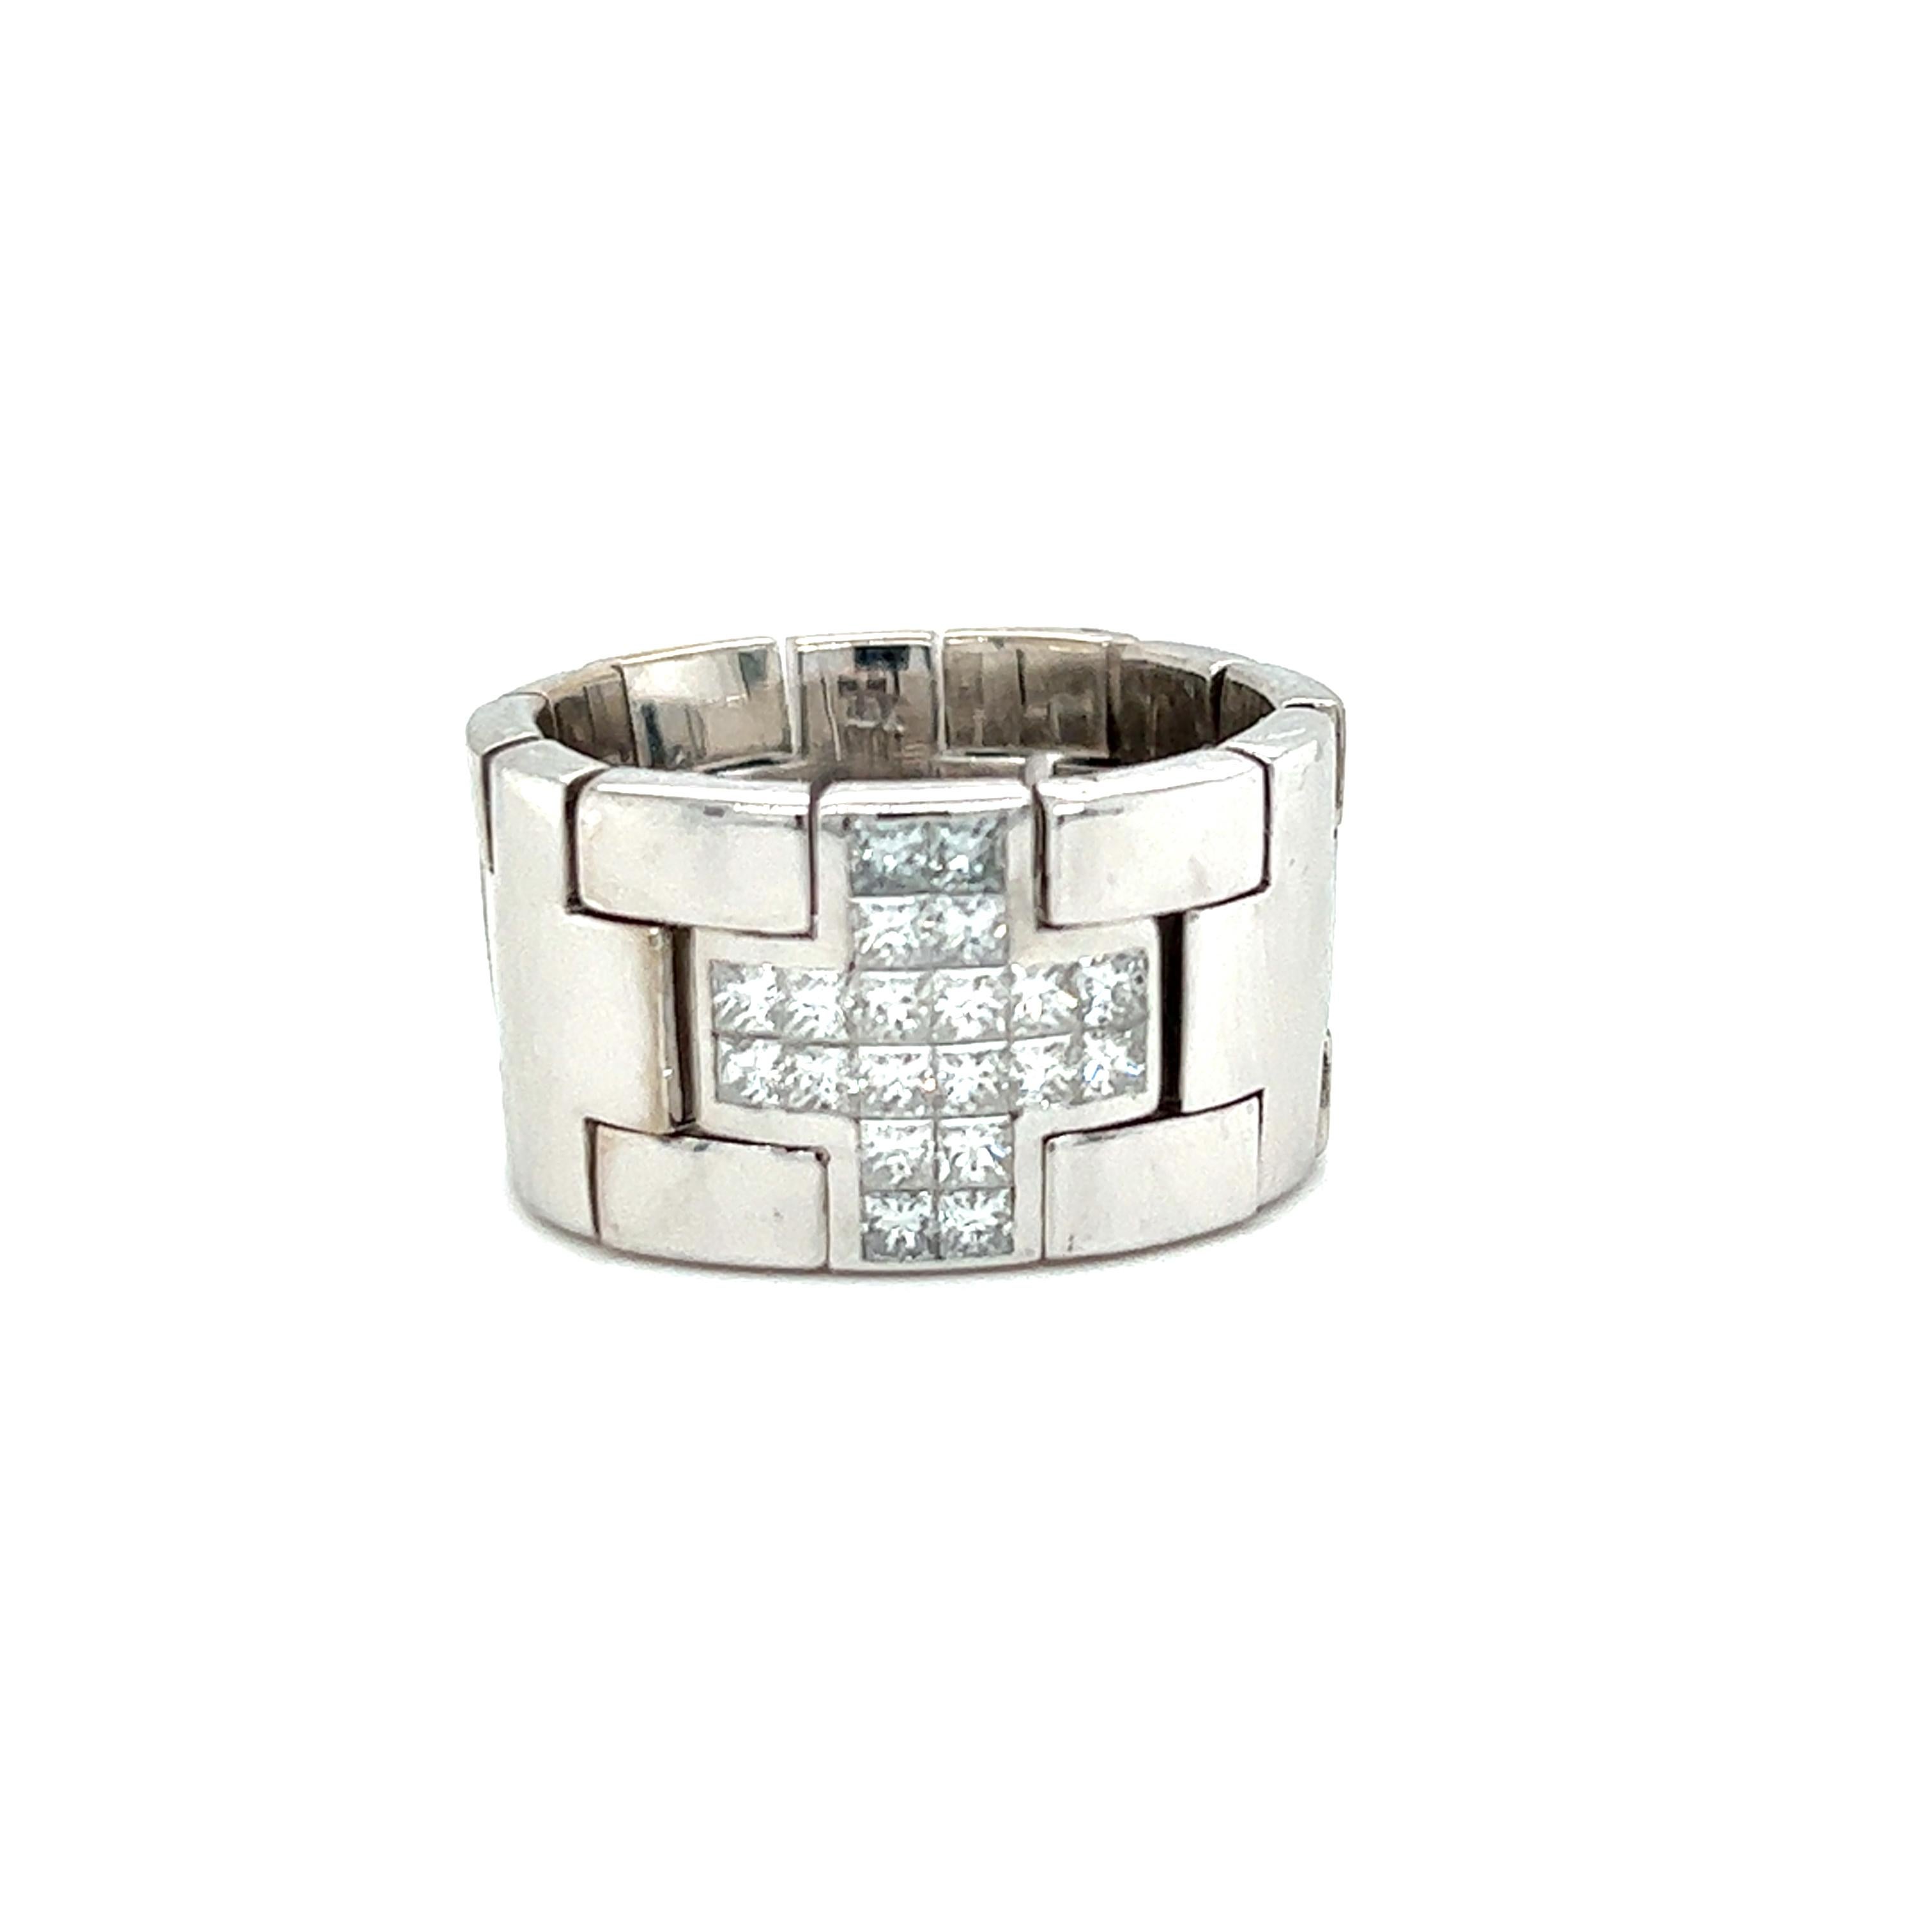 One 18 karat white gold 14.15mm wide link watch band  design ring set with twenty (20) invisible set princess cut diamonds, approximately 1.00 carat total weight with matching H/I color and Si1 clarity. The ring is stamped 